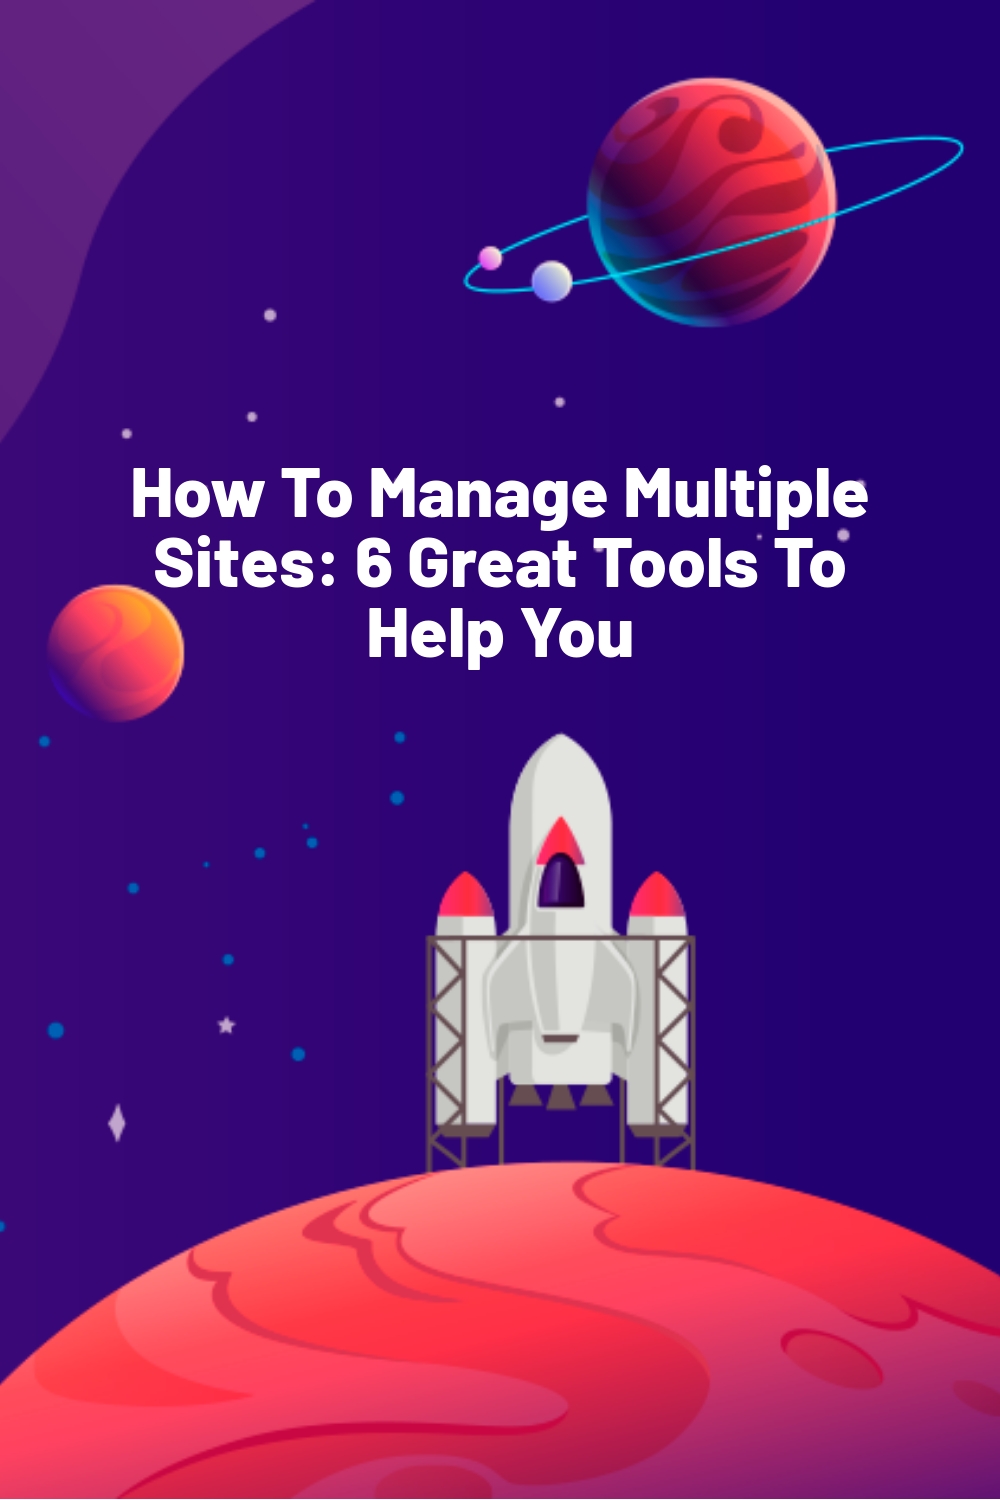 How To Manage Multiple Sites: 6 Great Tools To Help You